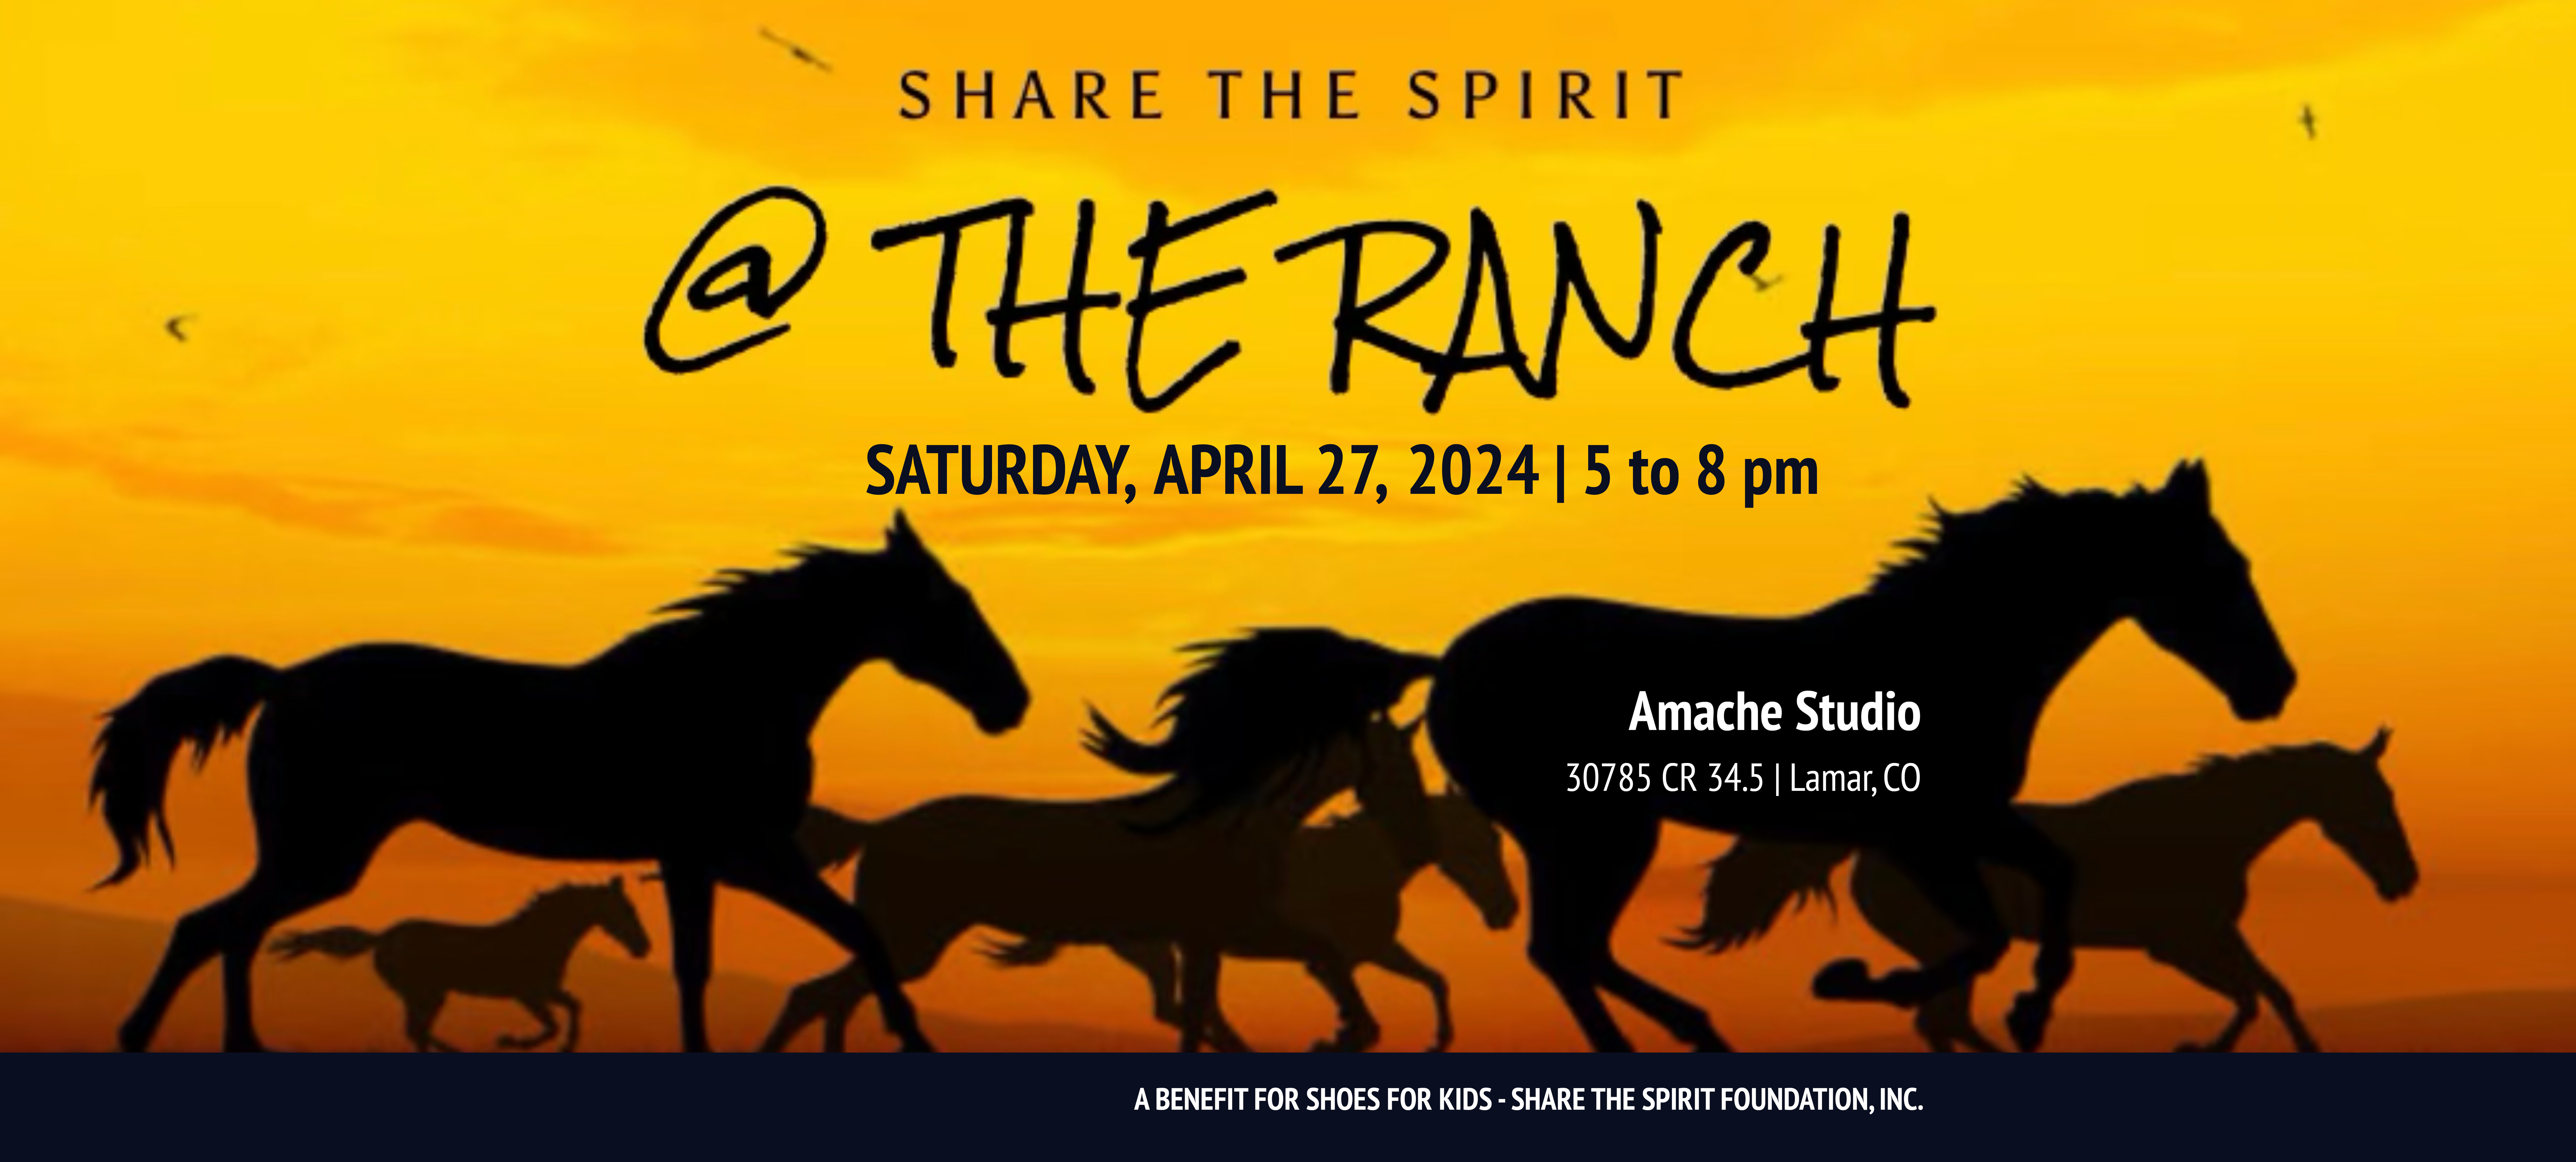 SHARE THE SPIRIT @ THE RANCH